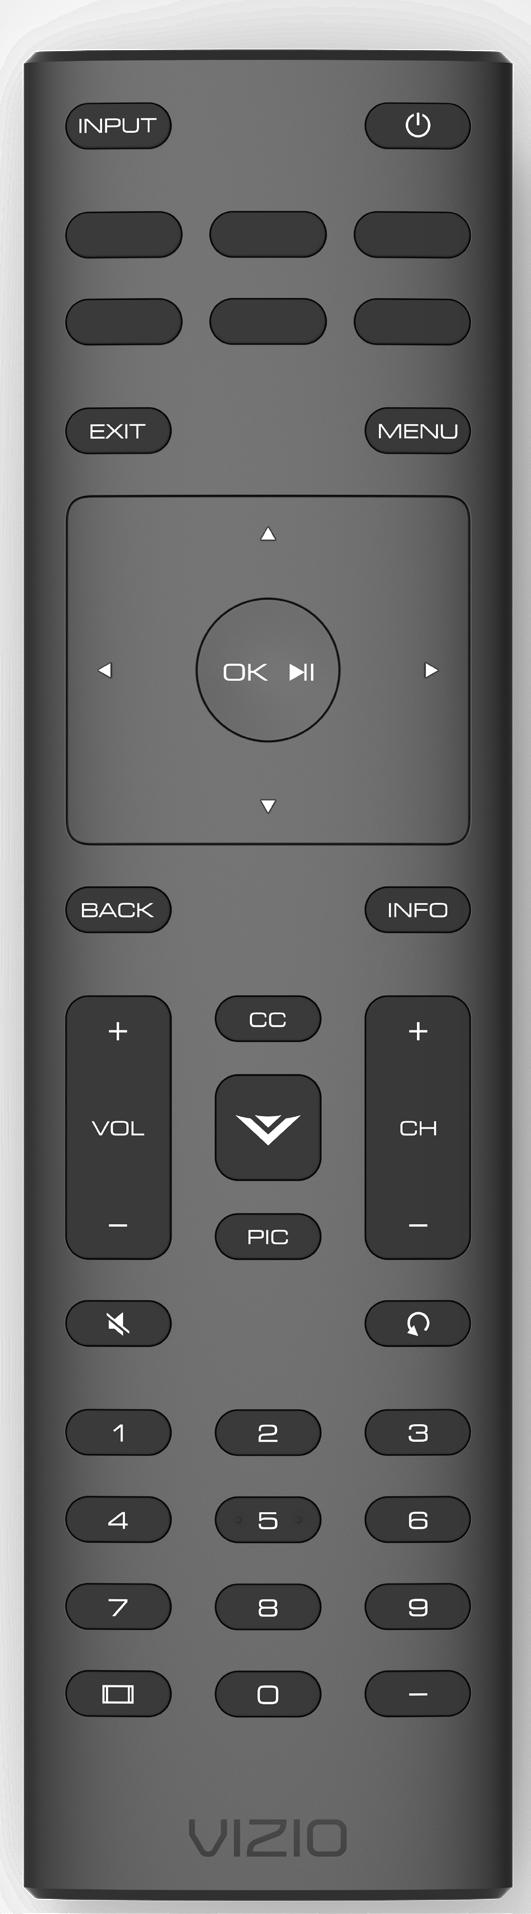 Pic - Cycle through the different picture setting modes 14. Channel Up/Down- Change the channel. 15. Mute - Turn the audio on or off 16. Last - Return to the last viewed channel.. 17.